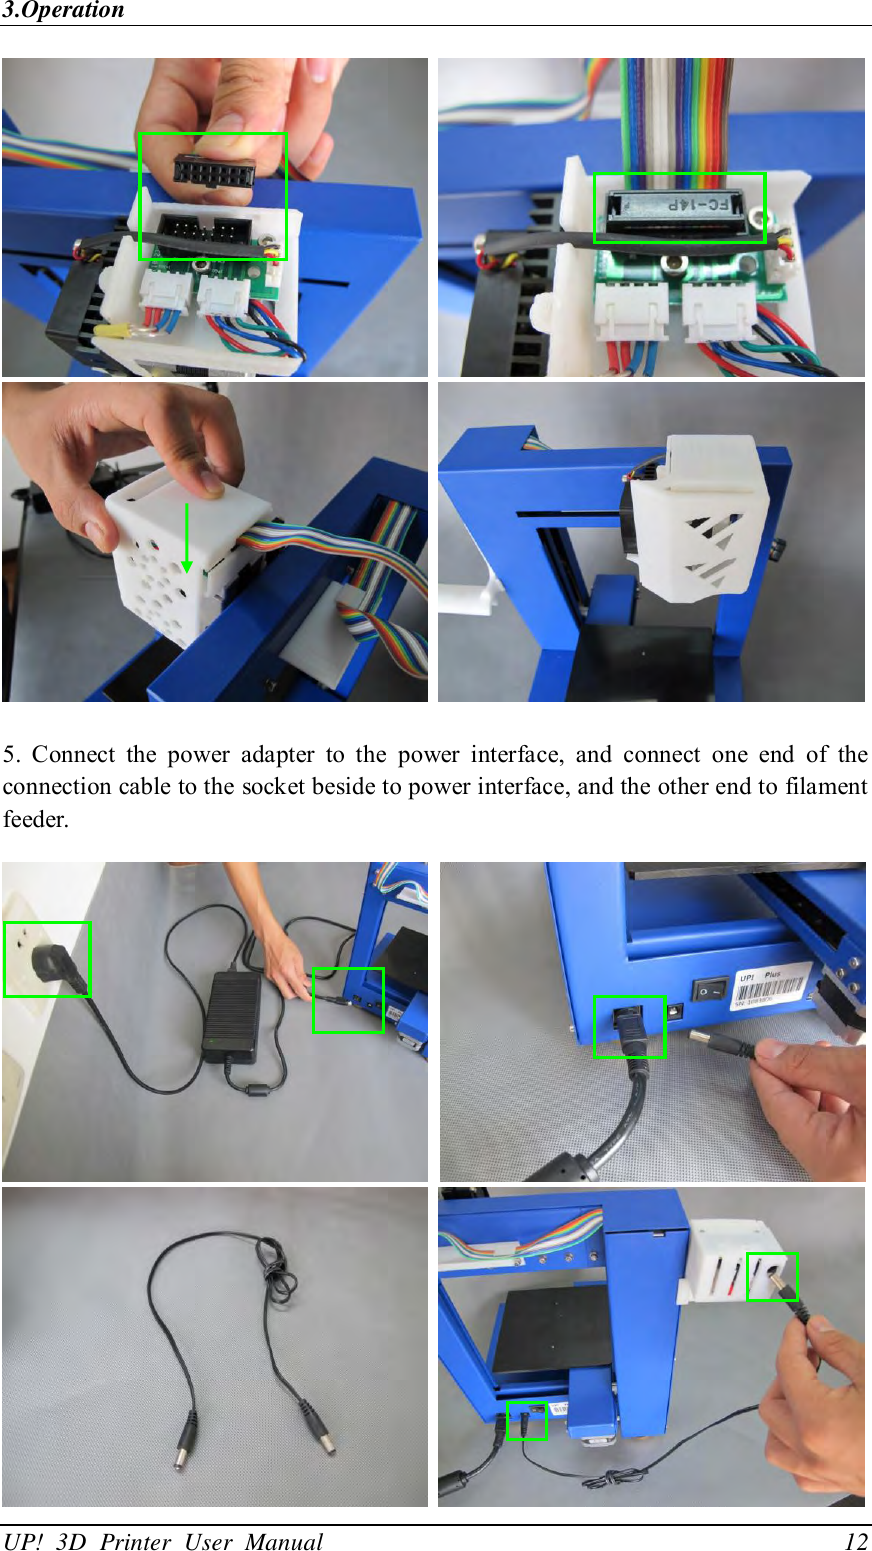 3.Operation UP!  3D  Printer  User  Manual                                12        5.  Connect  the  power  adapter  to  the  power  interface,  and  connect  one  end  of  the connection cable to the socket beside to power interface, and the other end to filament feeder.       